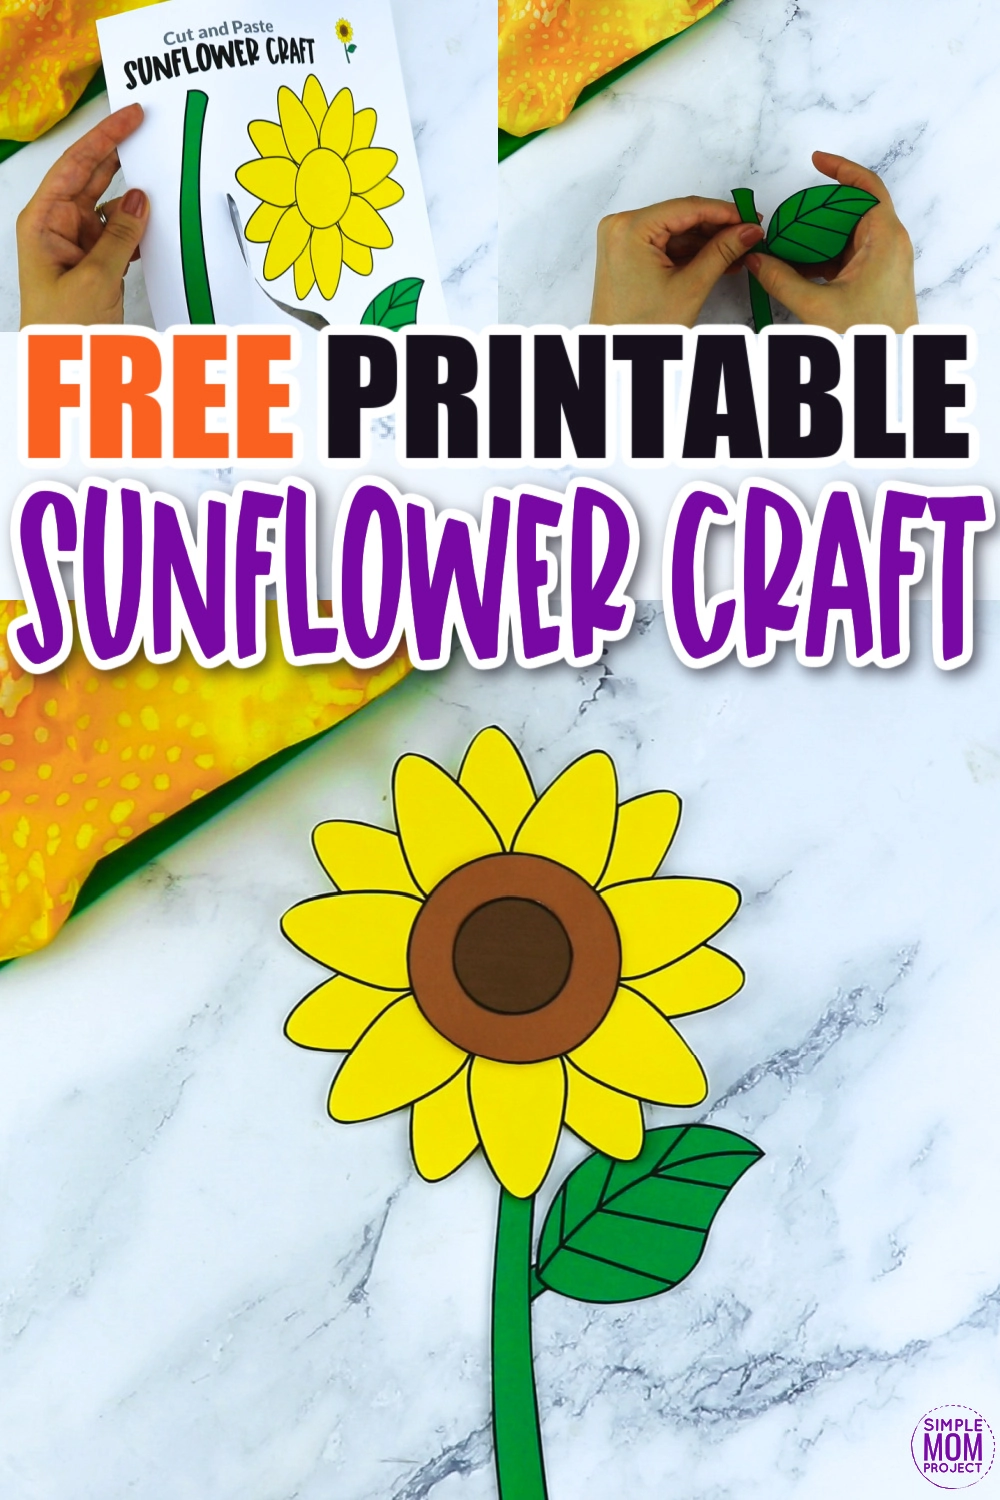 Free printable sunflower craft template â simple mom project